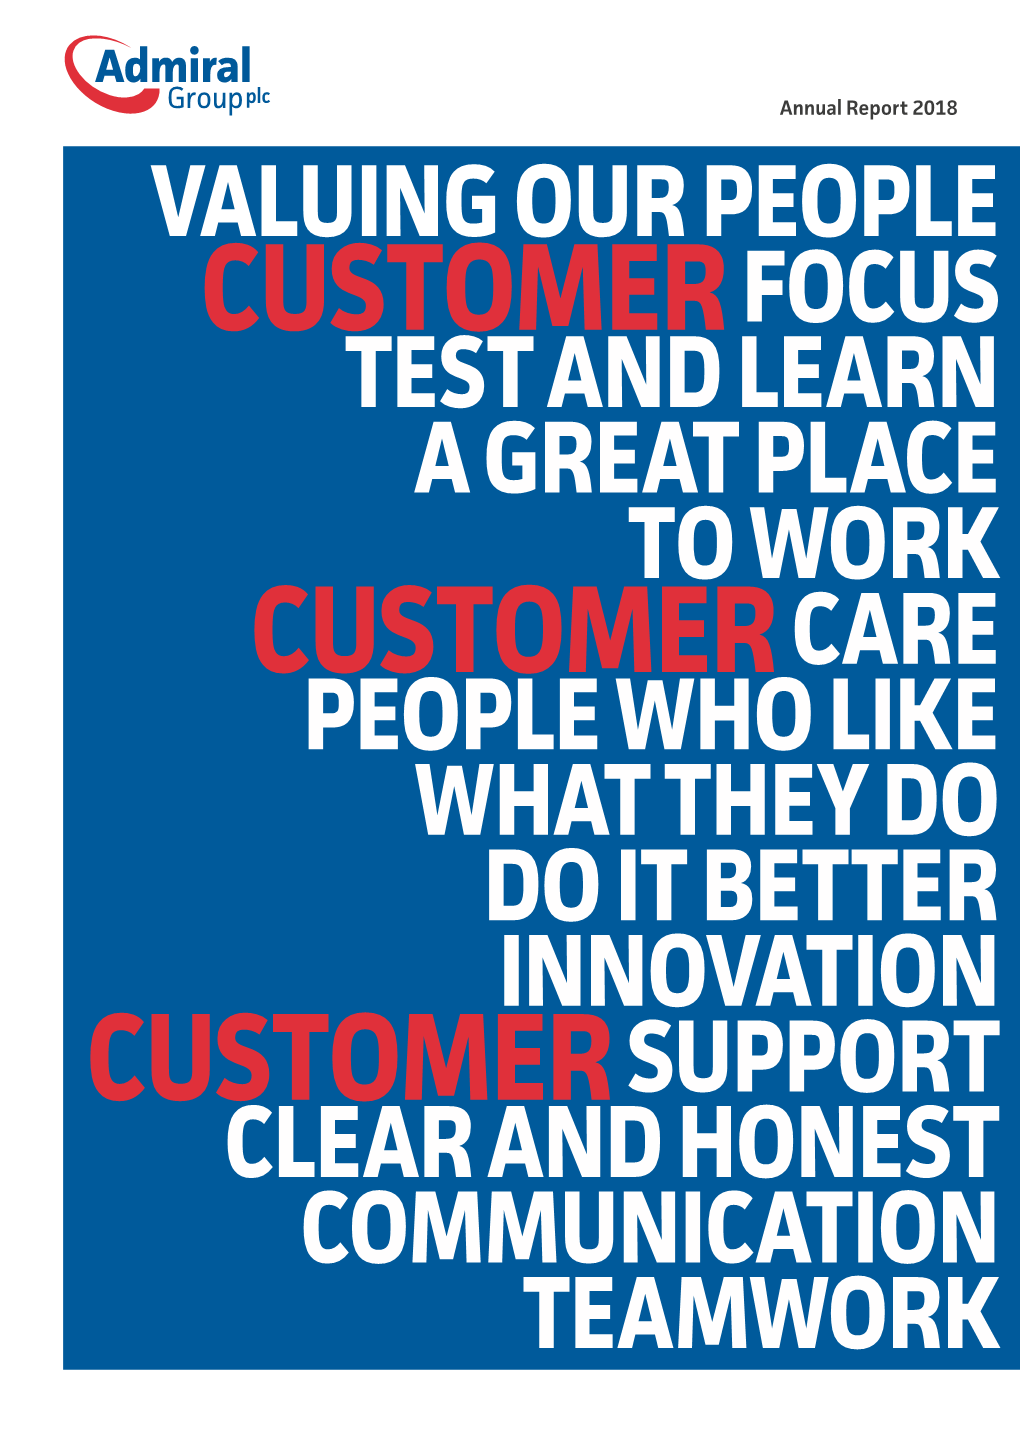 Annual Report 2018 VALUING OUR PEOPLE CUSTOMER FOCUS TEST and LEARN a GREAT PLACE to WORK CUSTOMER CARE PEOPLE WHO LIKE WHAT THEY DO